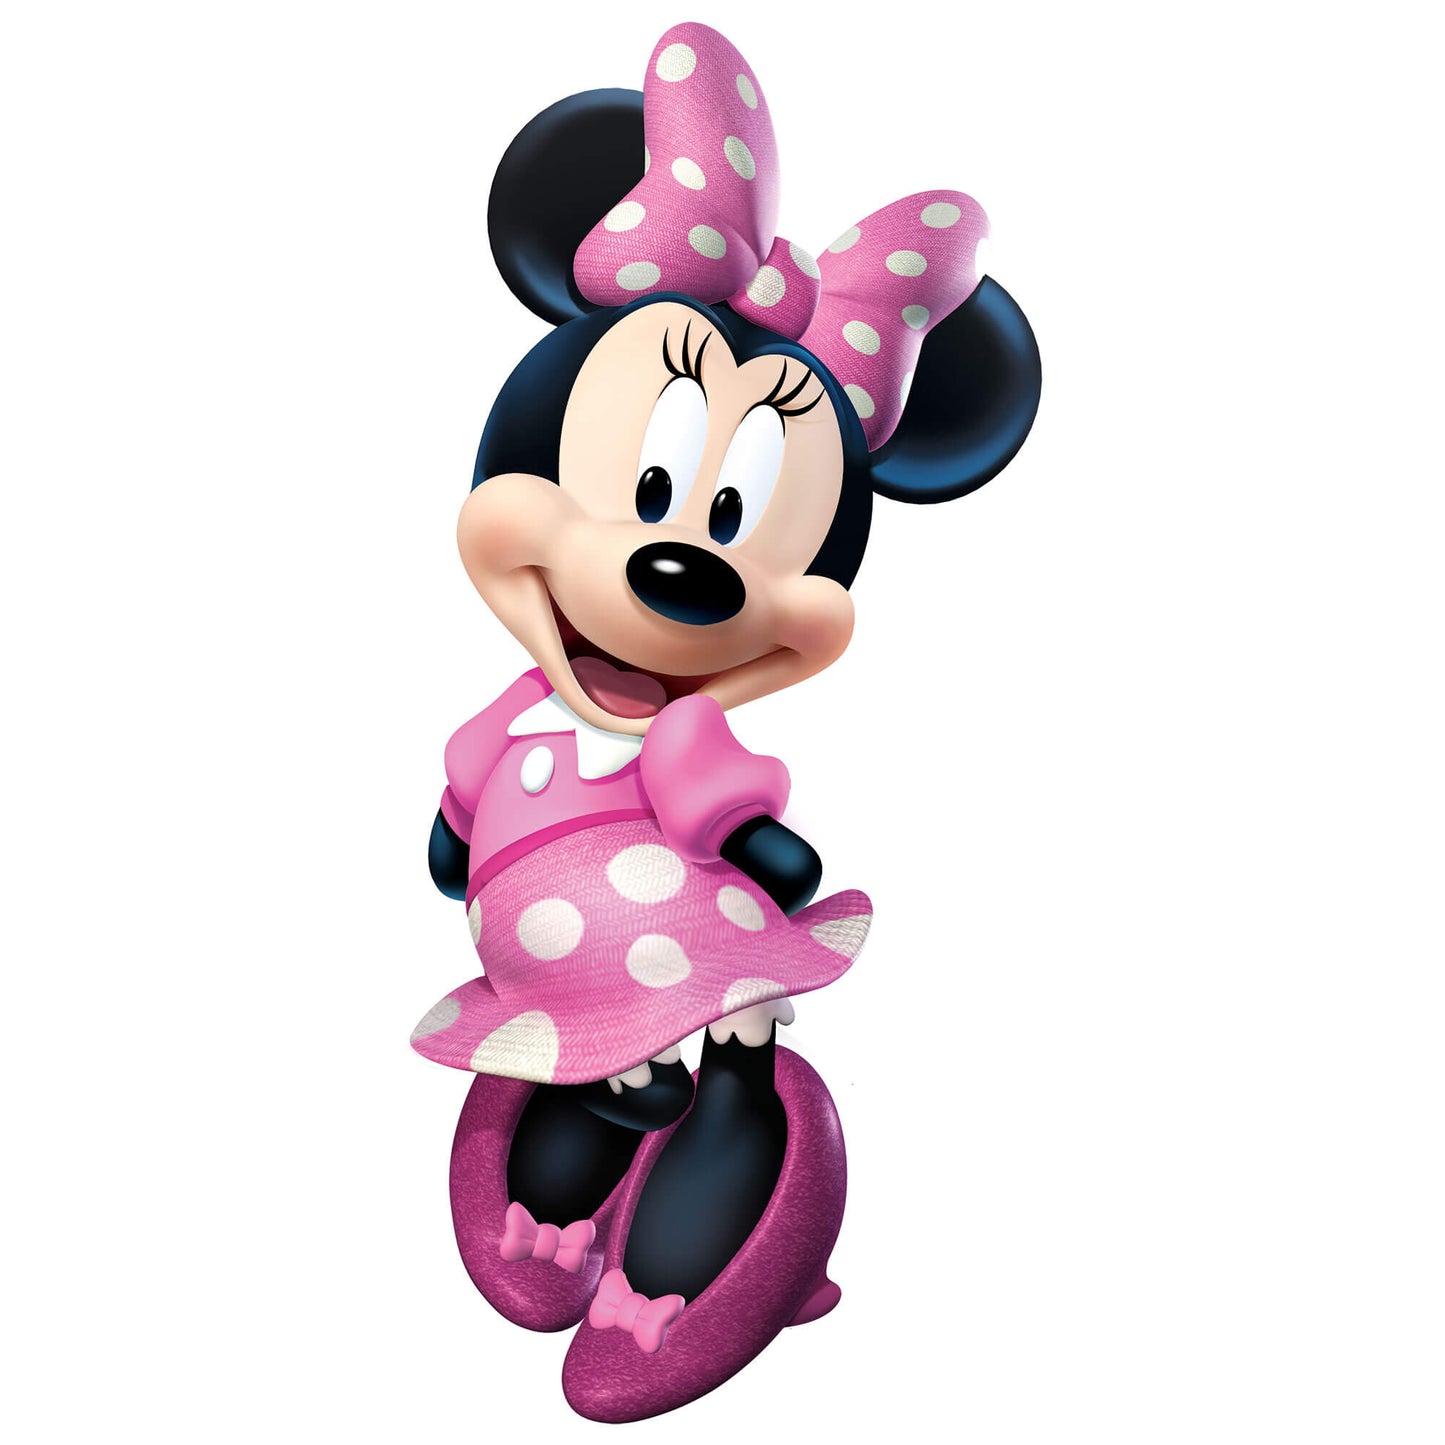 Minnie Mouse Bow-Tique Giant Peel & Stick Wall Decal – US Wall Decor